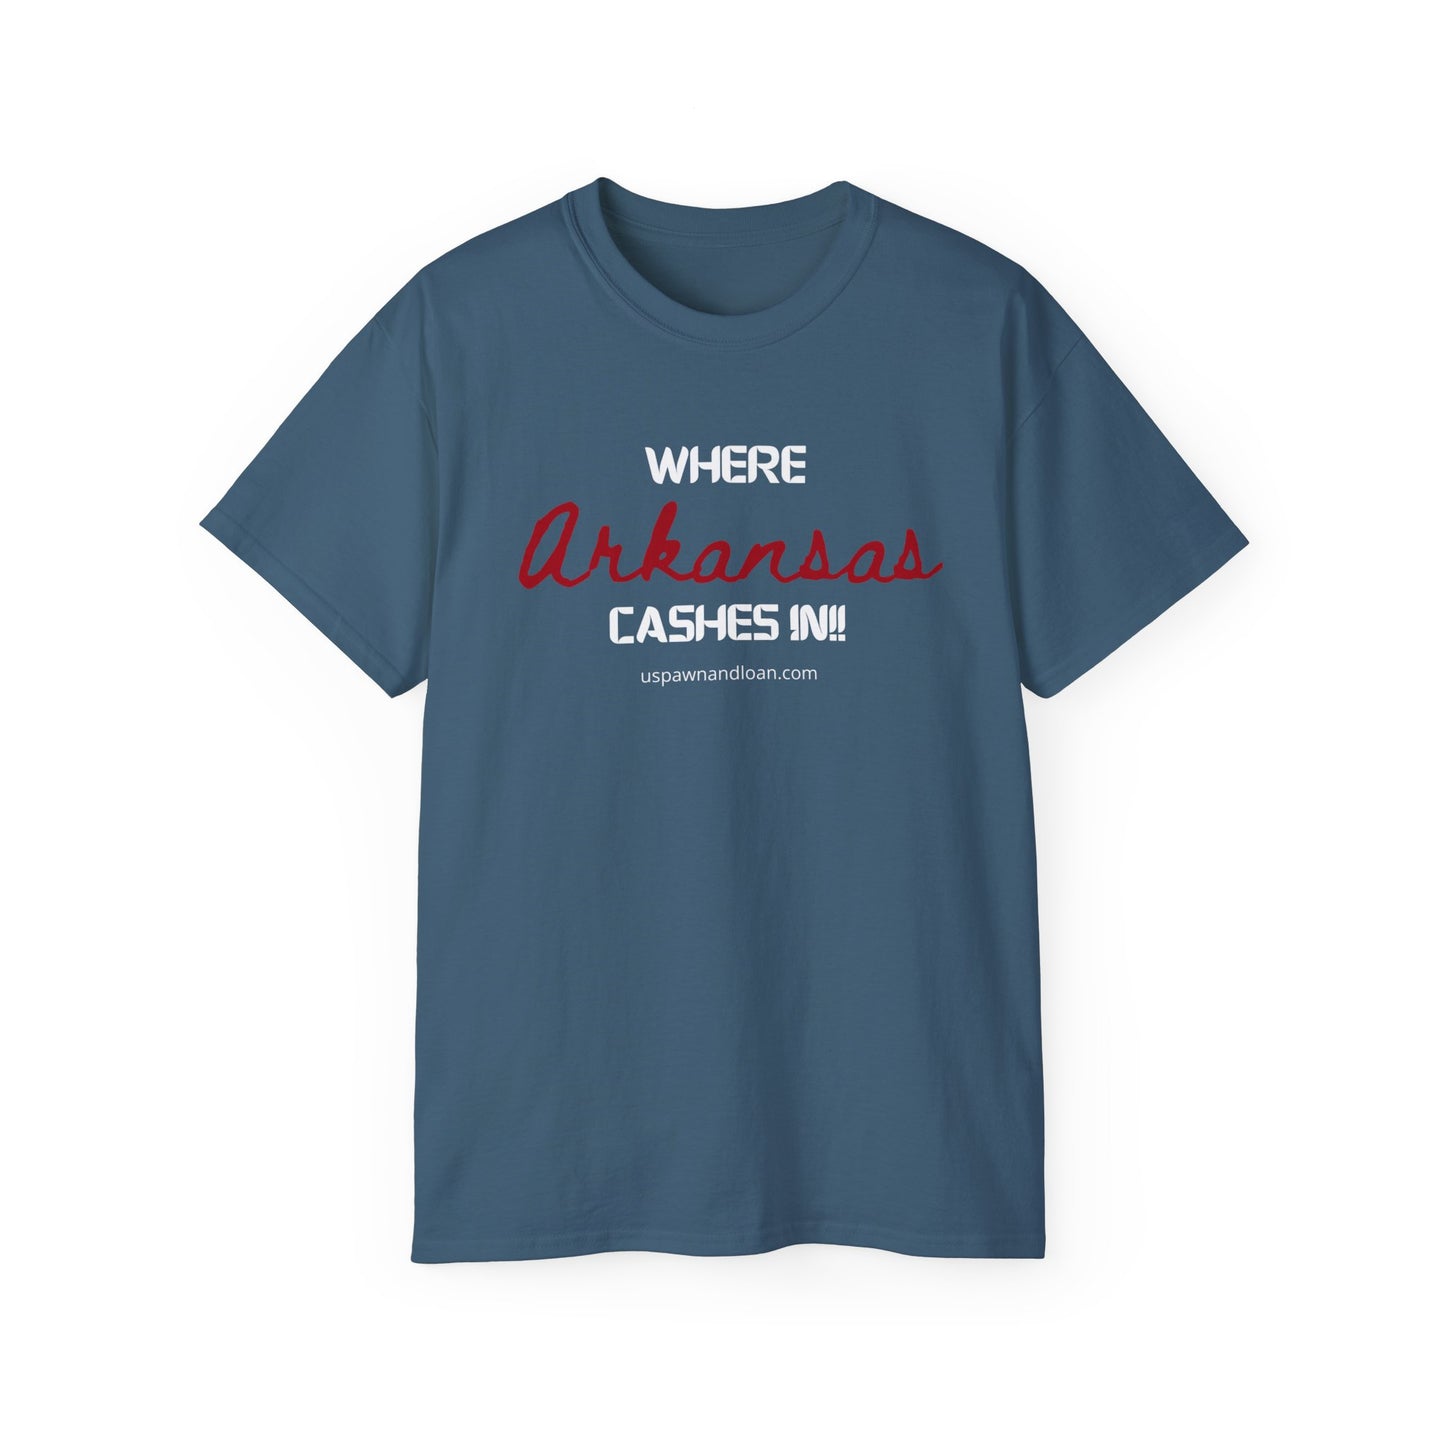 Where Arkansas Cashes In!! | Unisex Ultra Cotton Tee | US Pawn and Loan